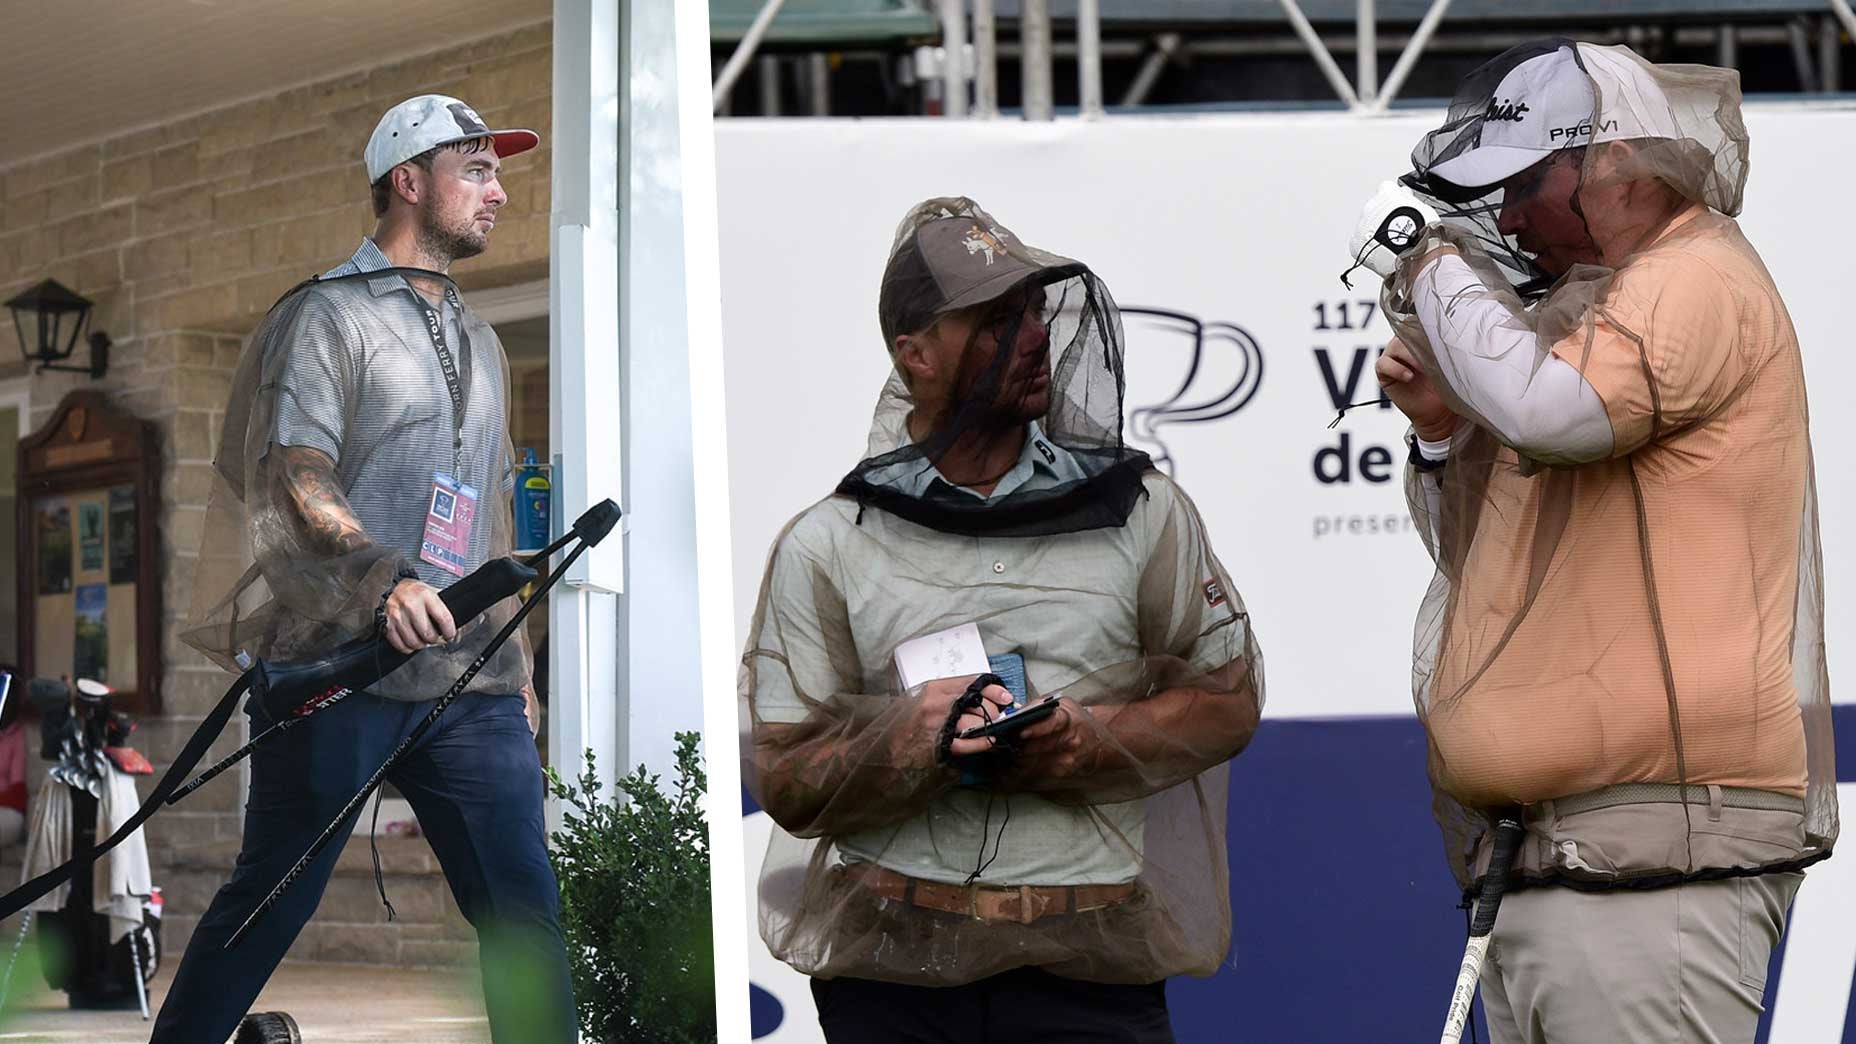 players and caddies moquito repellent gear argentina open